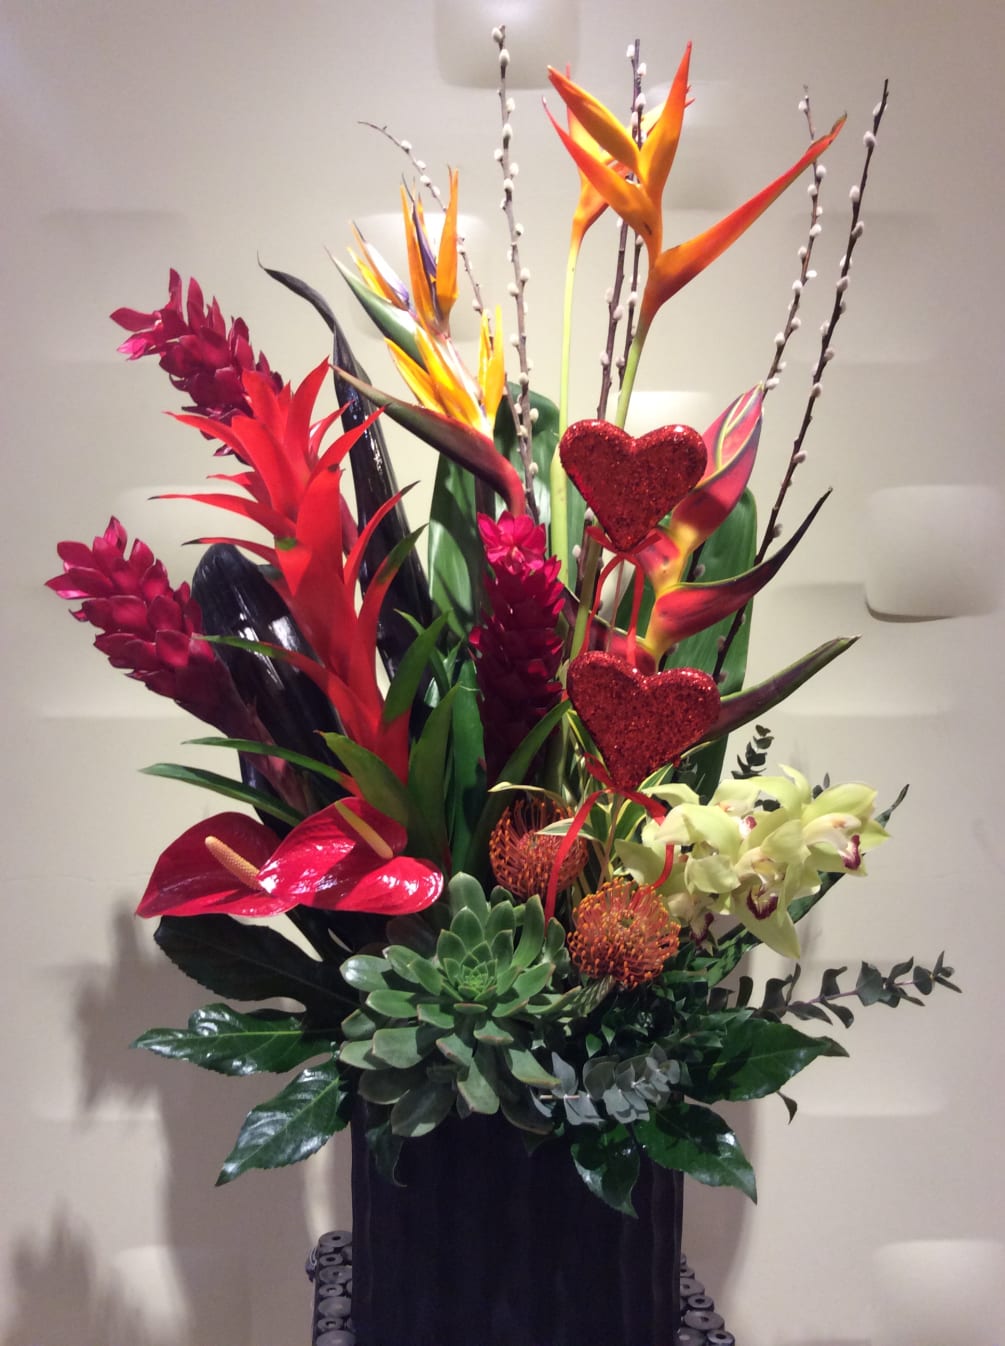  Exotics flowers from around the world orchids,ginger,anthurium ,bromeliads  birds of